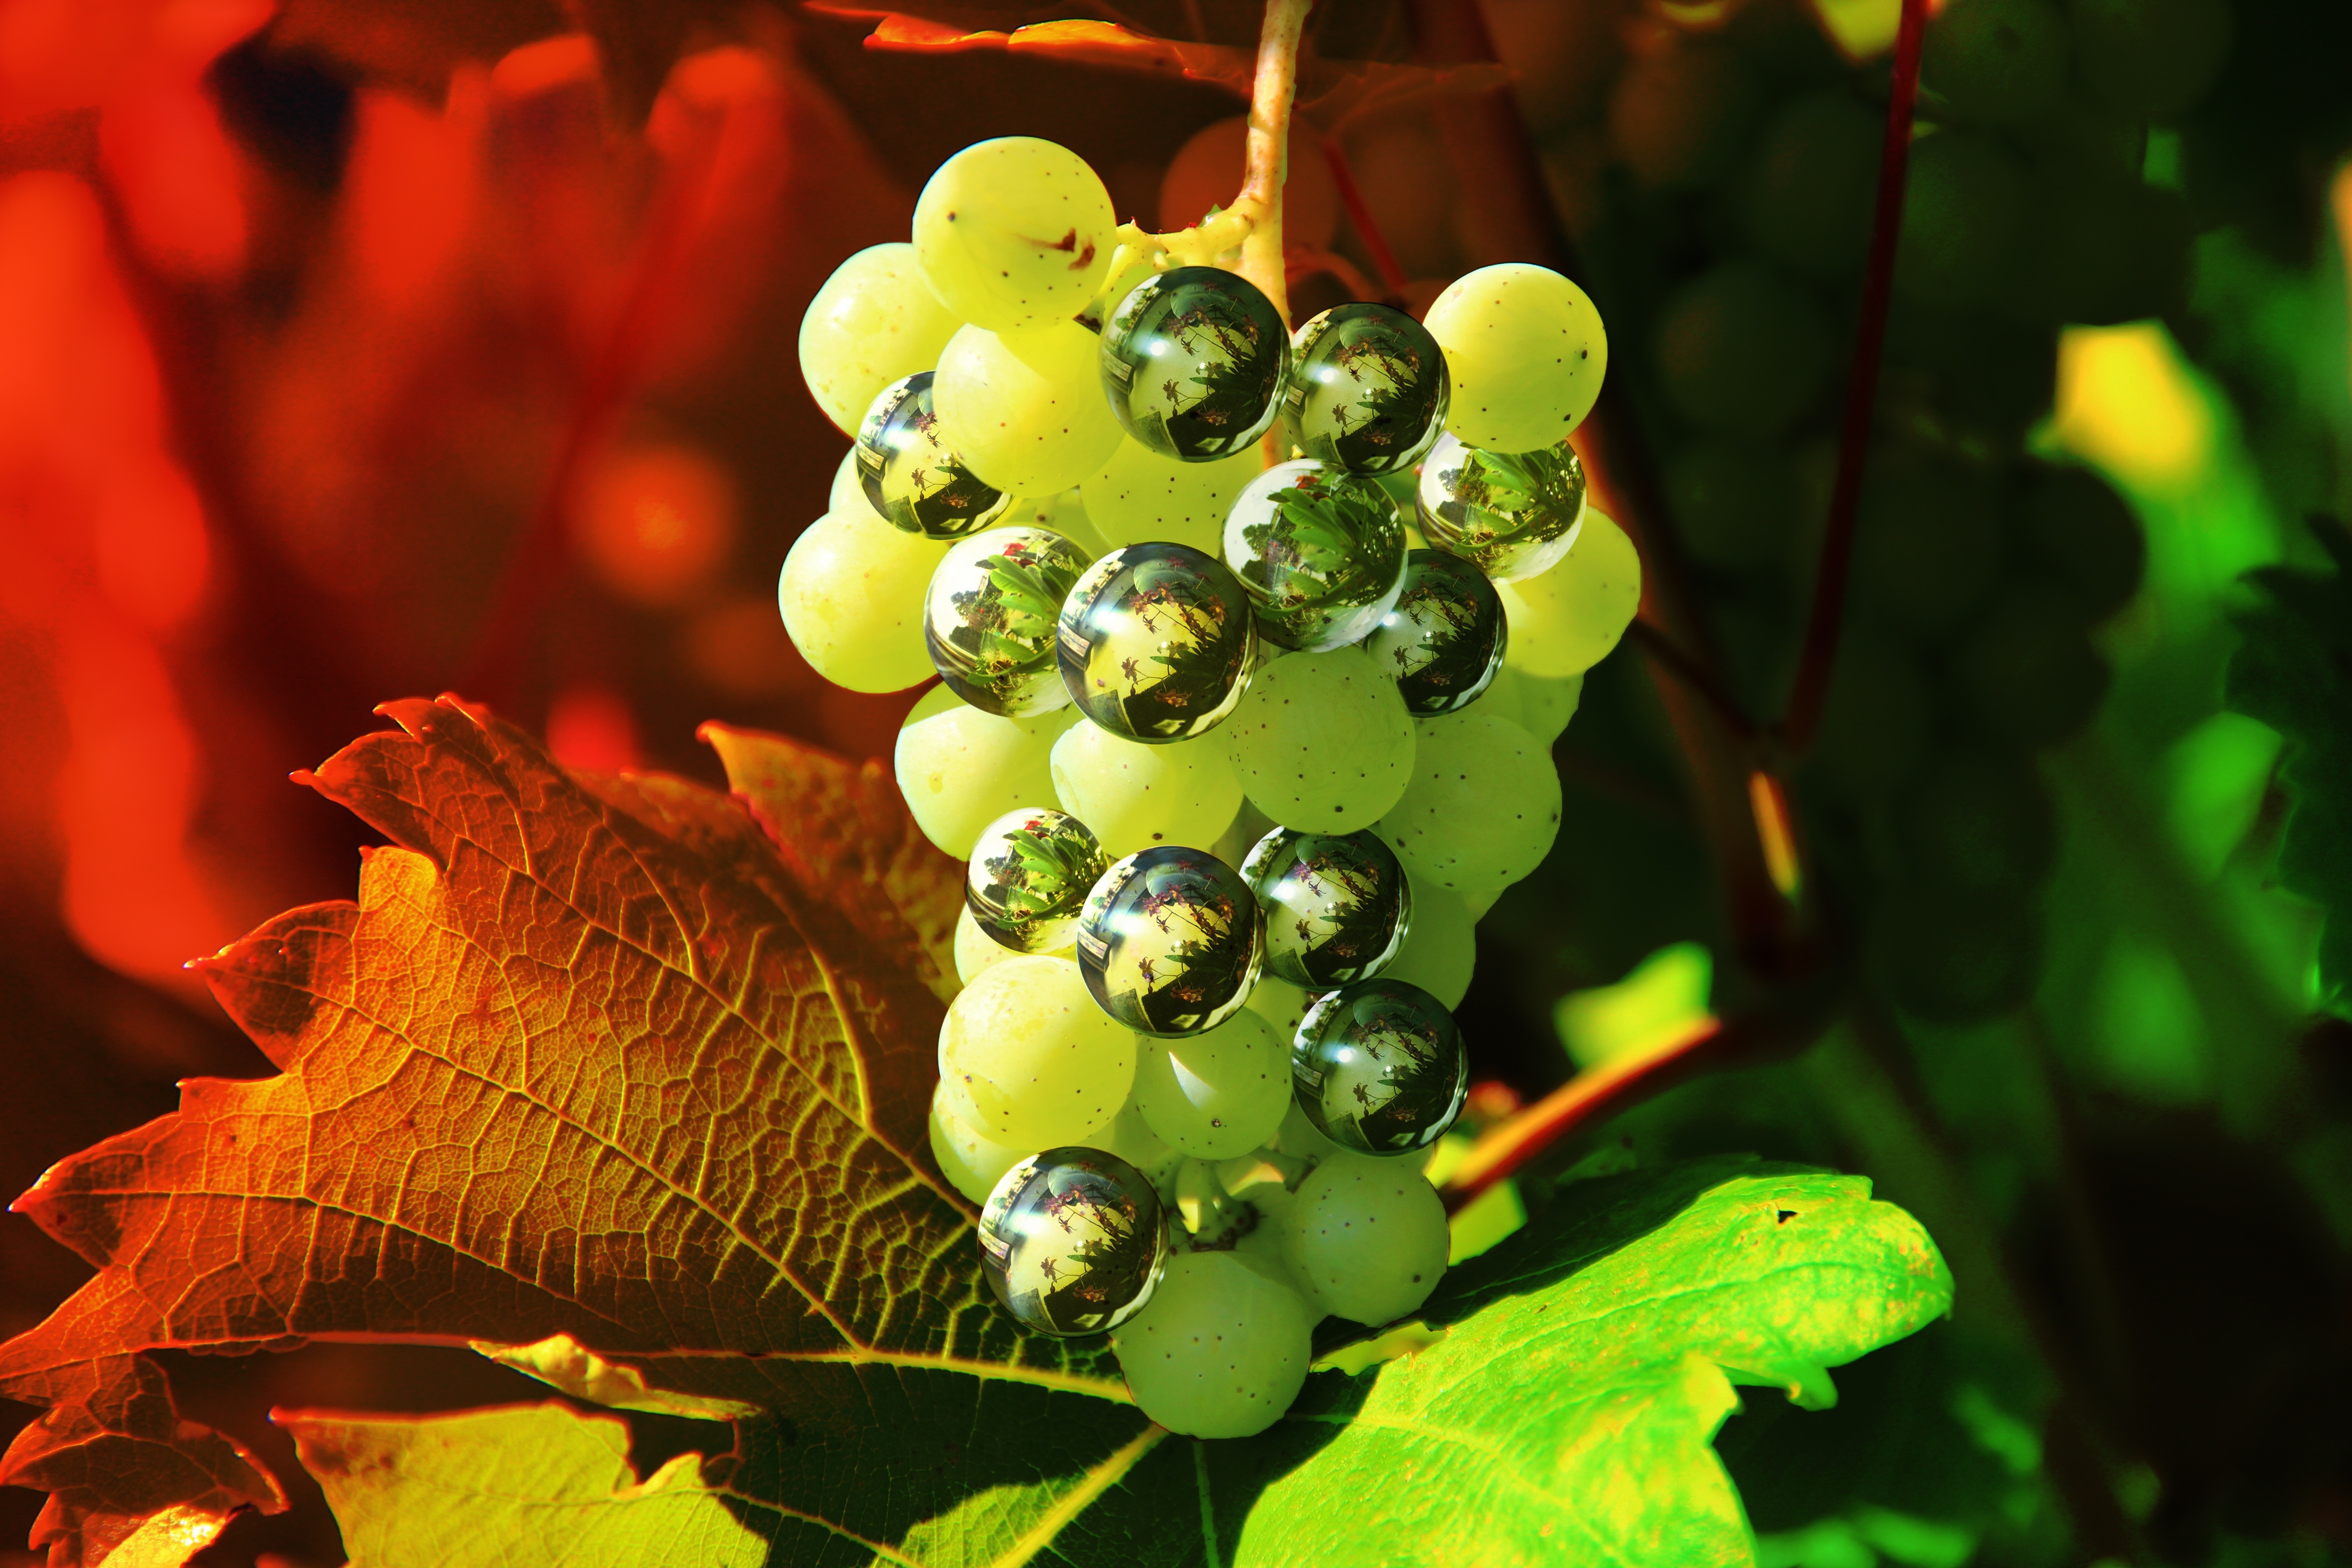 Digitally Altered, Grapes, Photoshop, close-up, green color